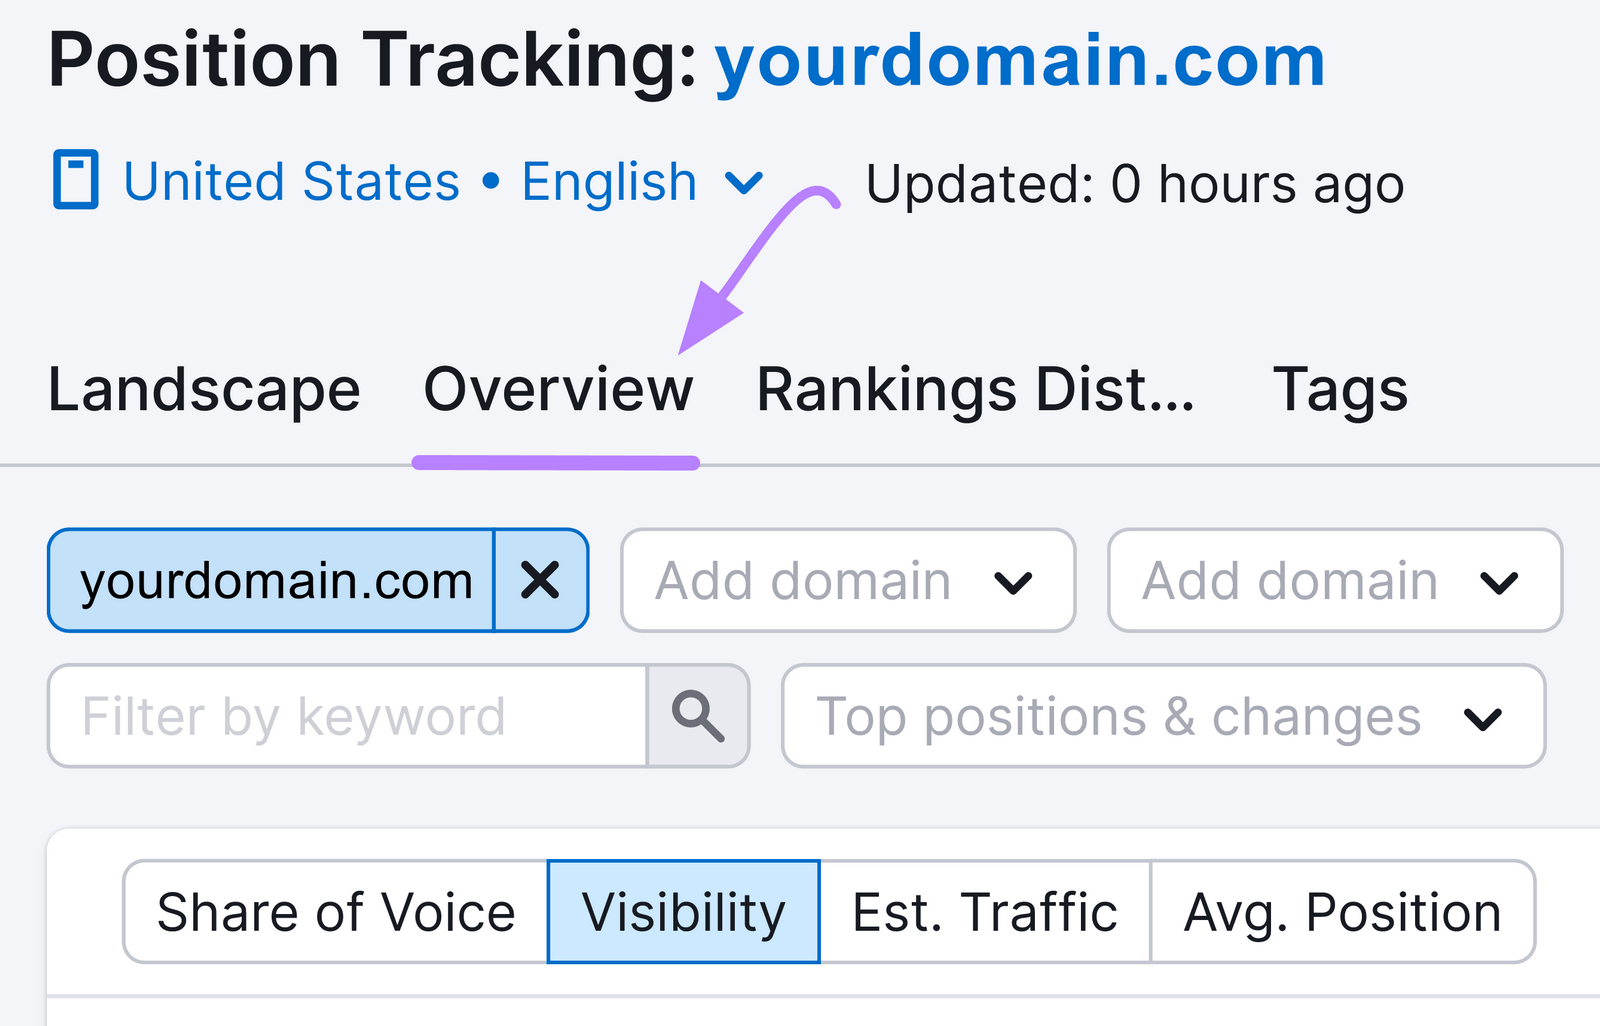 “Overview” tab selected in Position Tracking tool